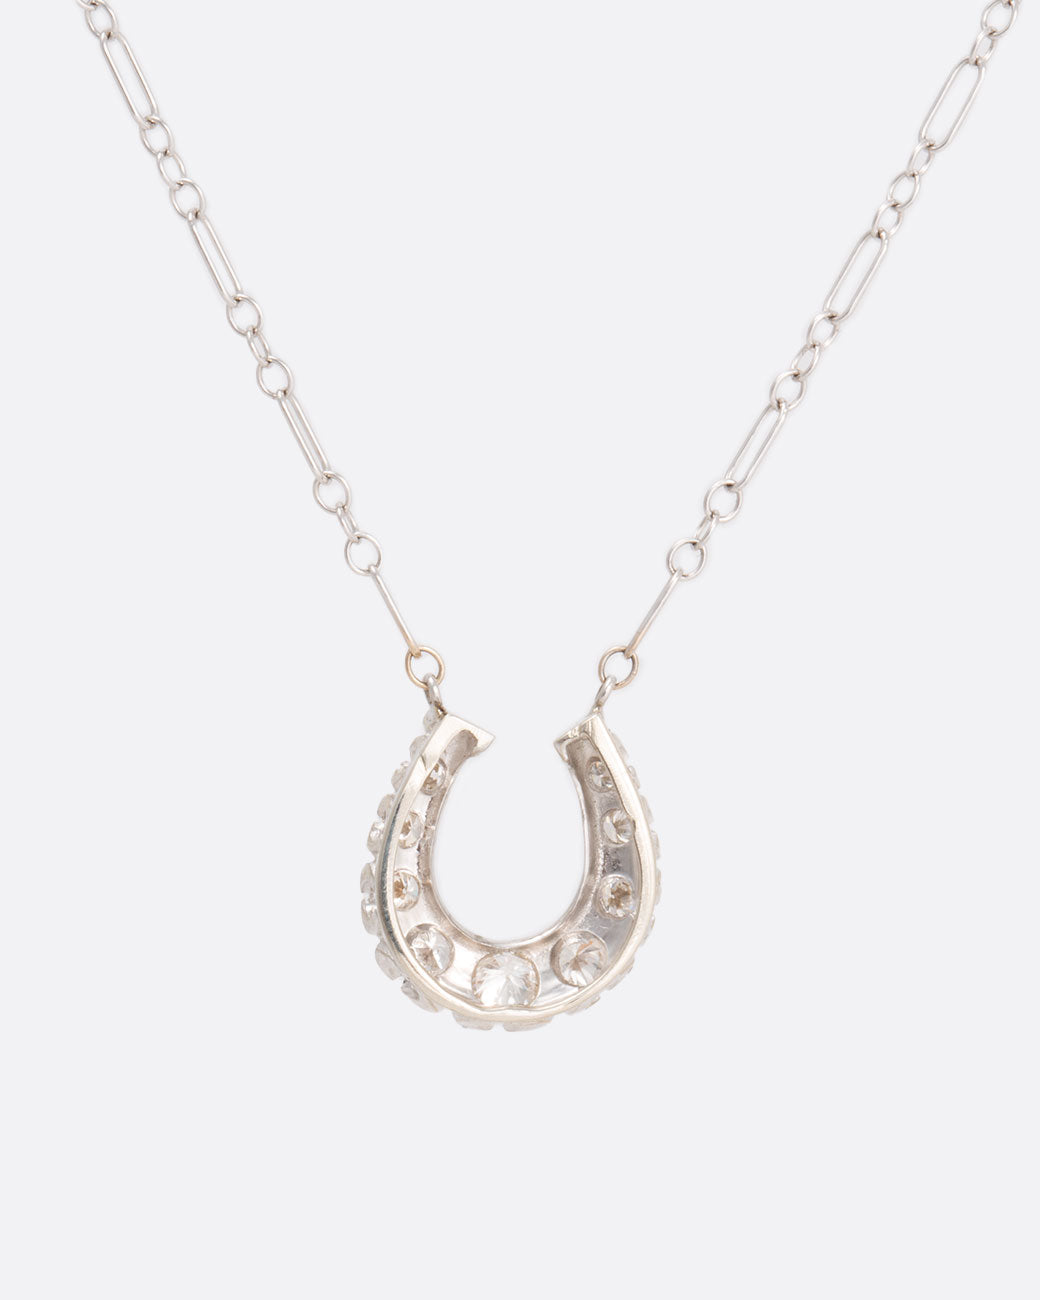 14K Solid White Gold Diamond Horseshoe Necklace, Lucky charm – LTB JEWELRY